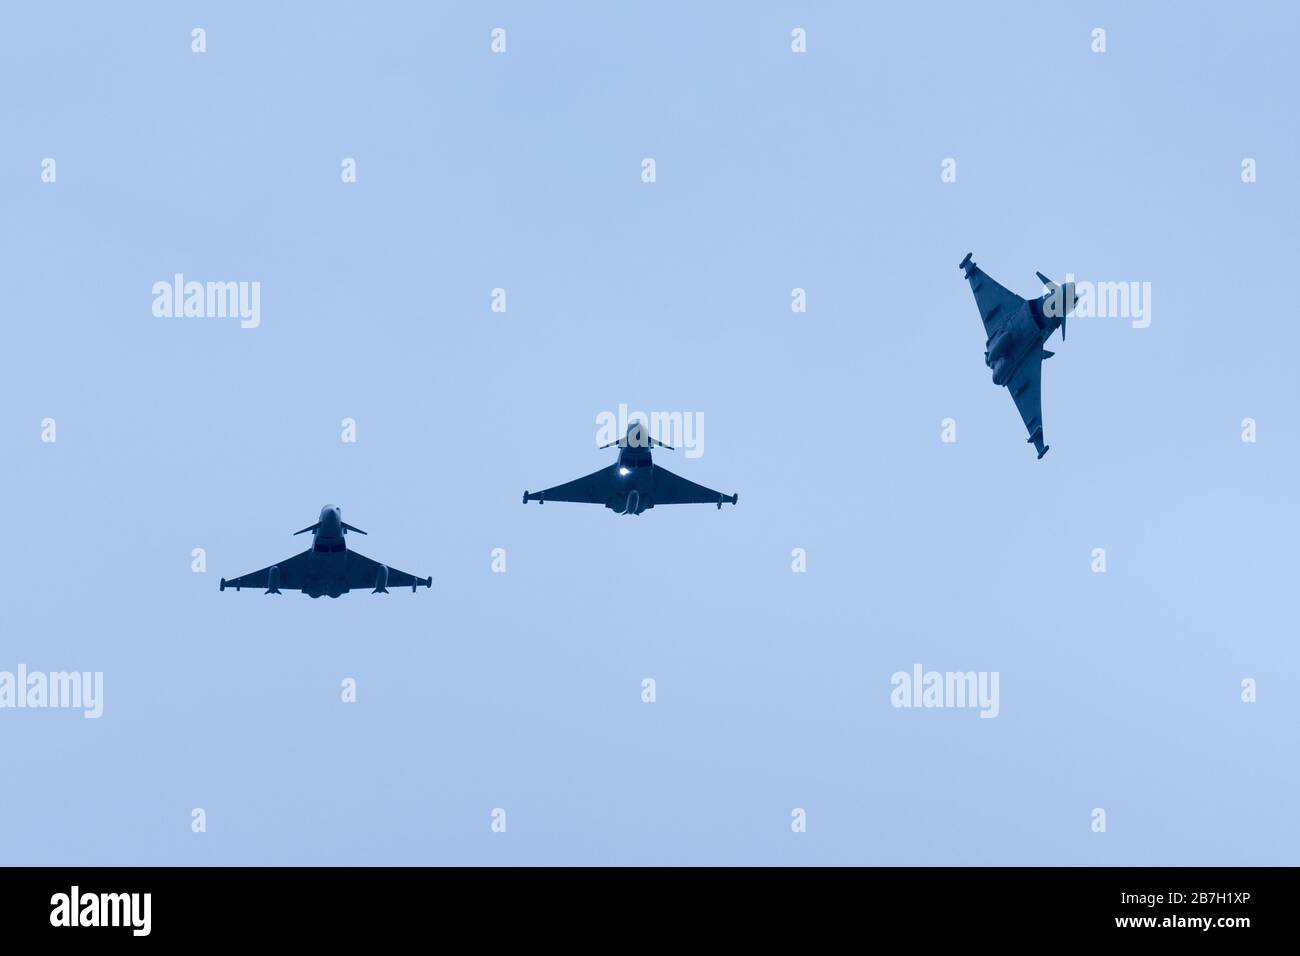 RAF Coningsby, Lincolnshire, UK. 16th Mar, 2020. Typhoon aircraft of 29 squadron on practice flights from Royal Air Force Coningsby, Lincolnshire. RAF airshows later in the year are under threat of postponement or cancellation due to the COVID-19 pandemic. Credit: Peter Lopeman/Alamy Live News Stock Photo